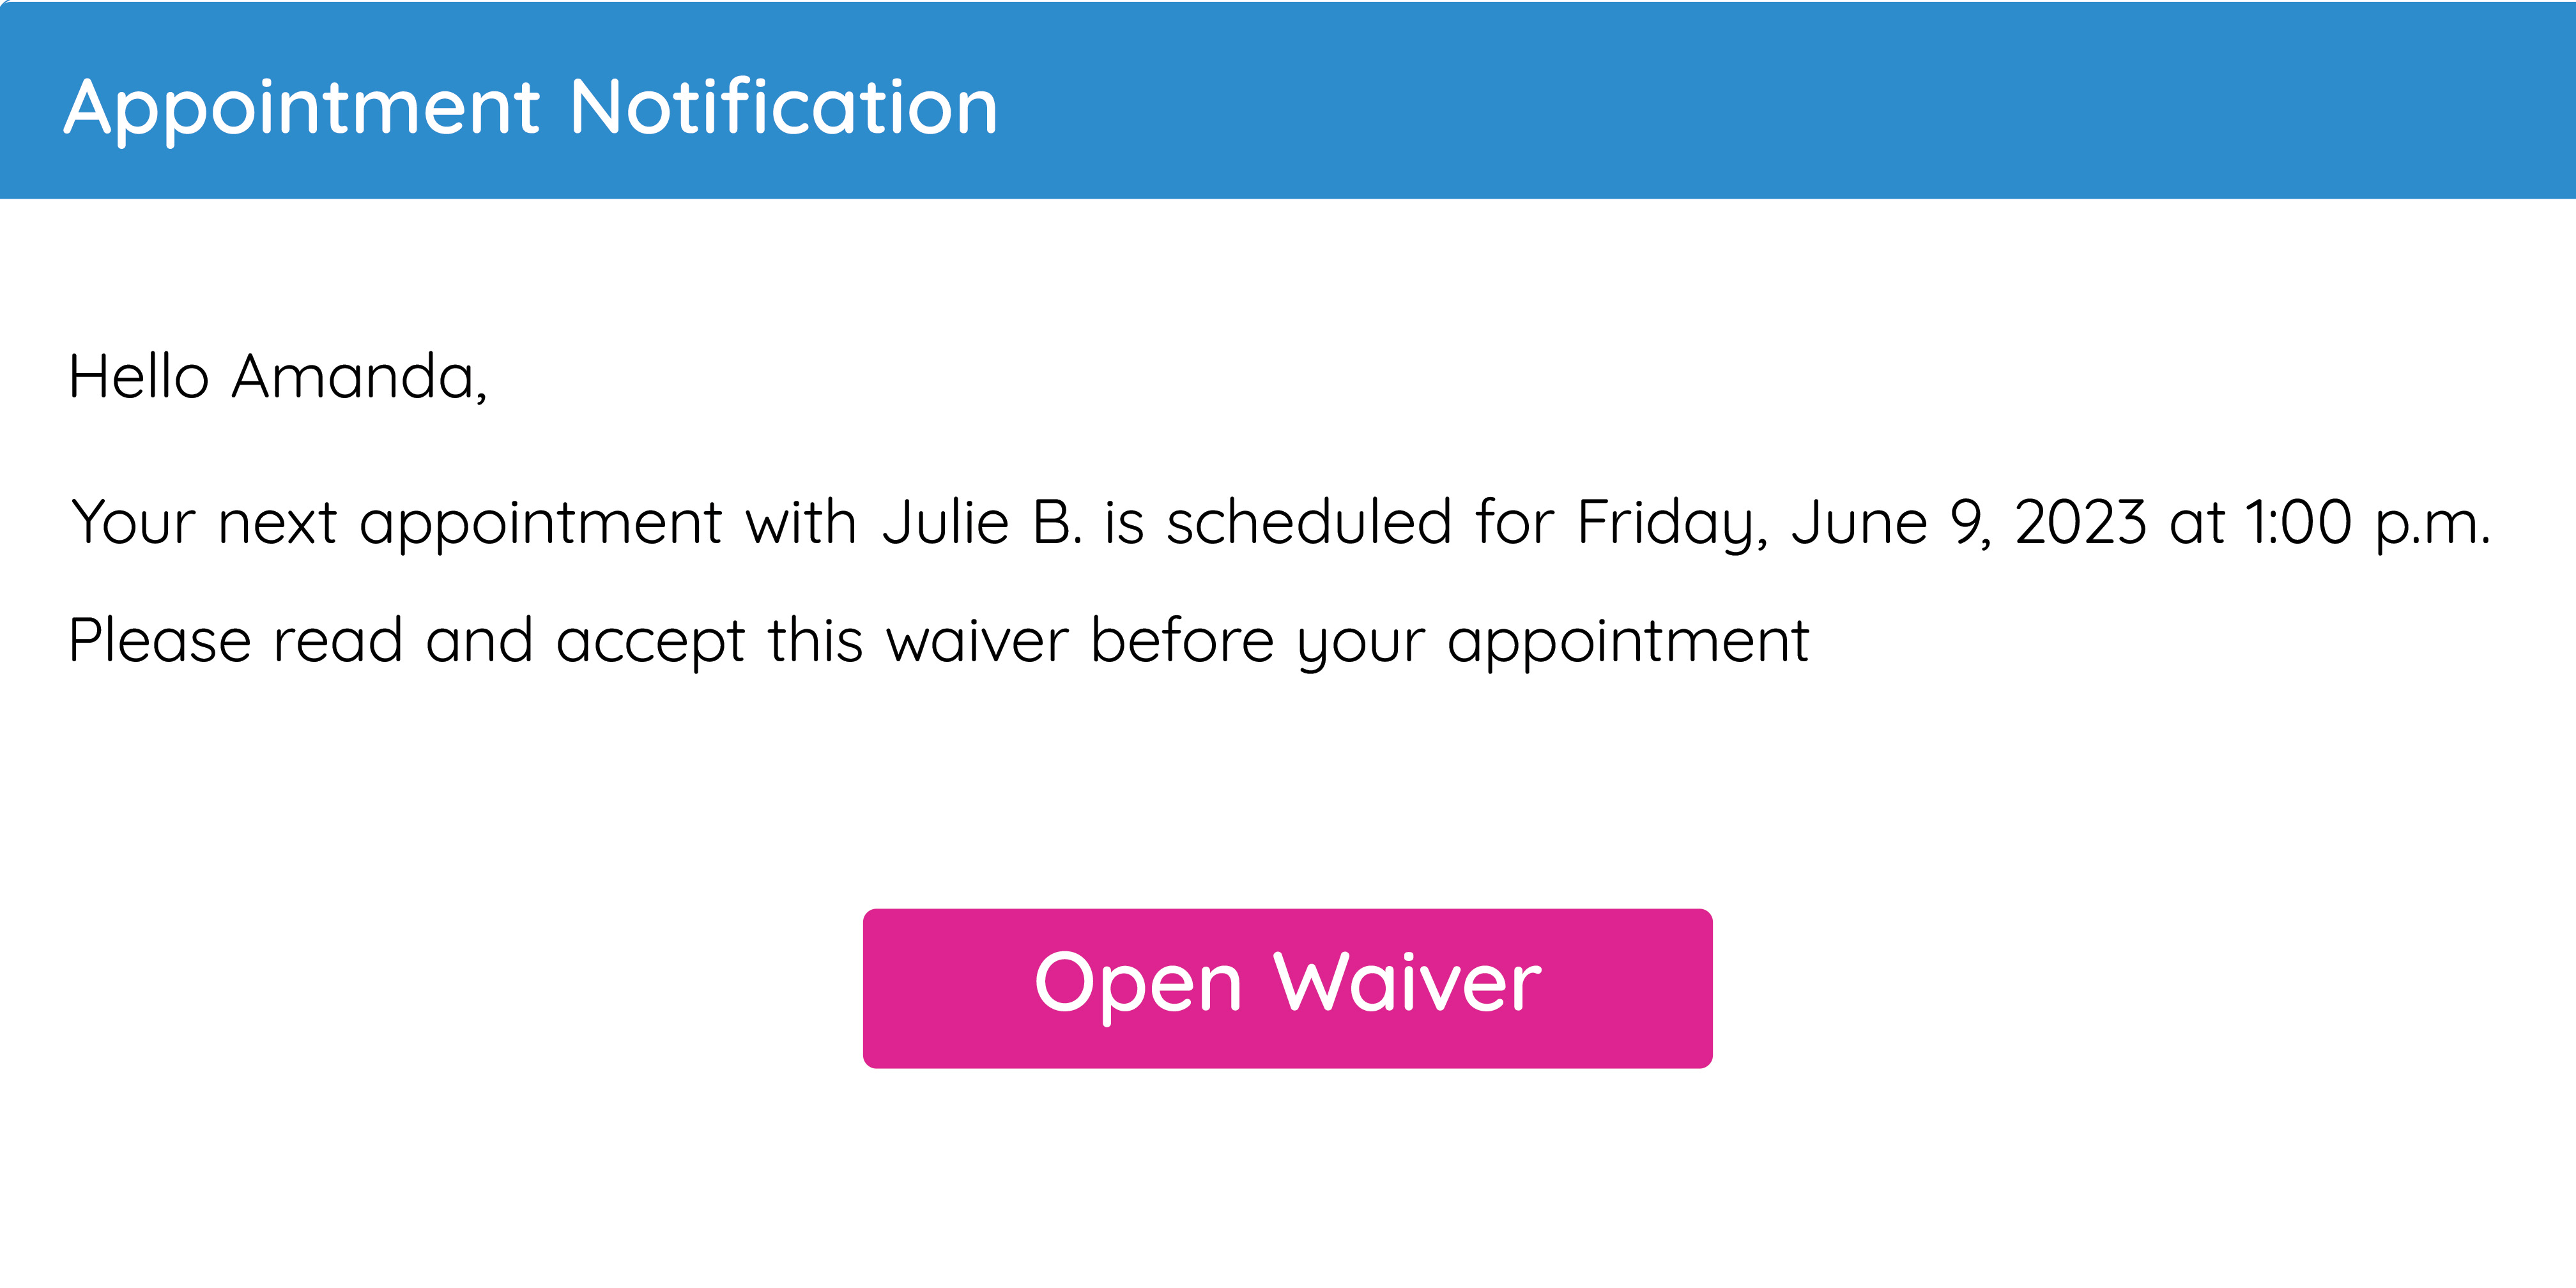 An acupuncturist' waiver included in the GOrendezvous notification email